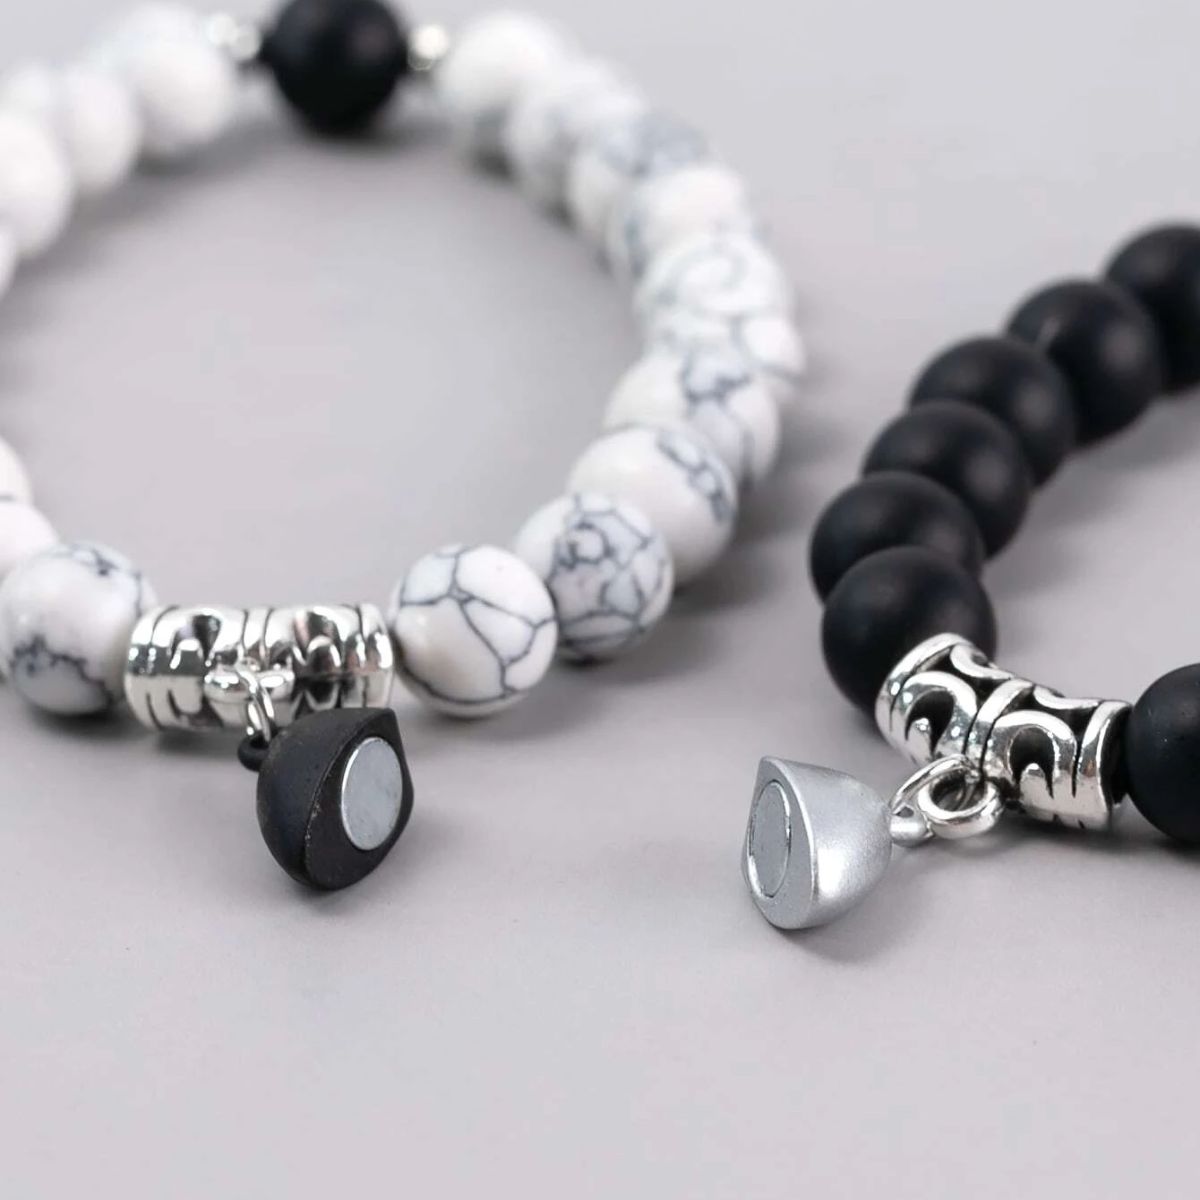 Bracelet couples long-distance touch bluetooth connection ladies and men's  gift jewelry set (2 pieces)